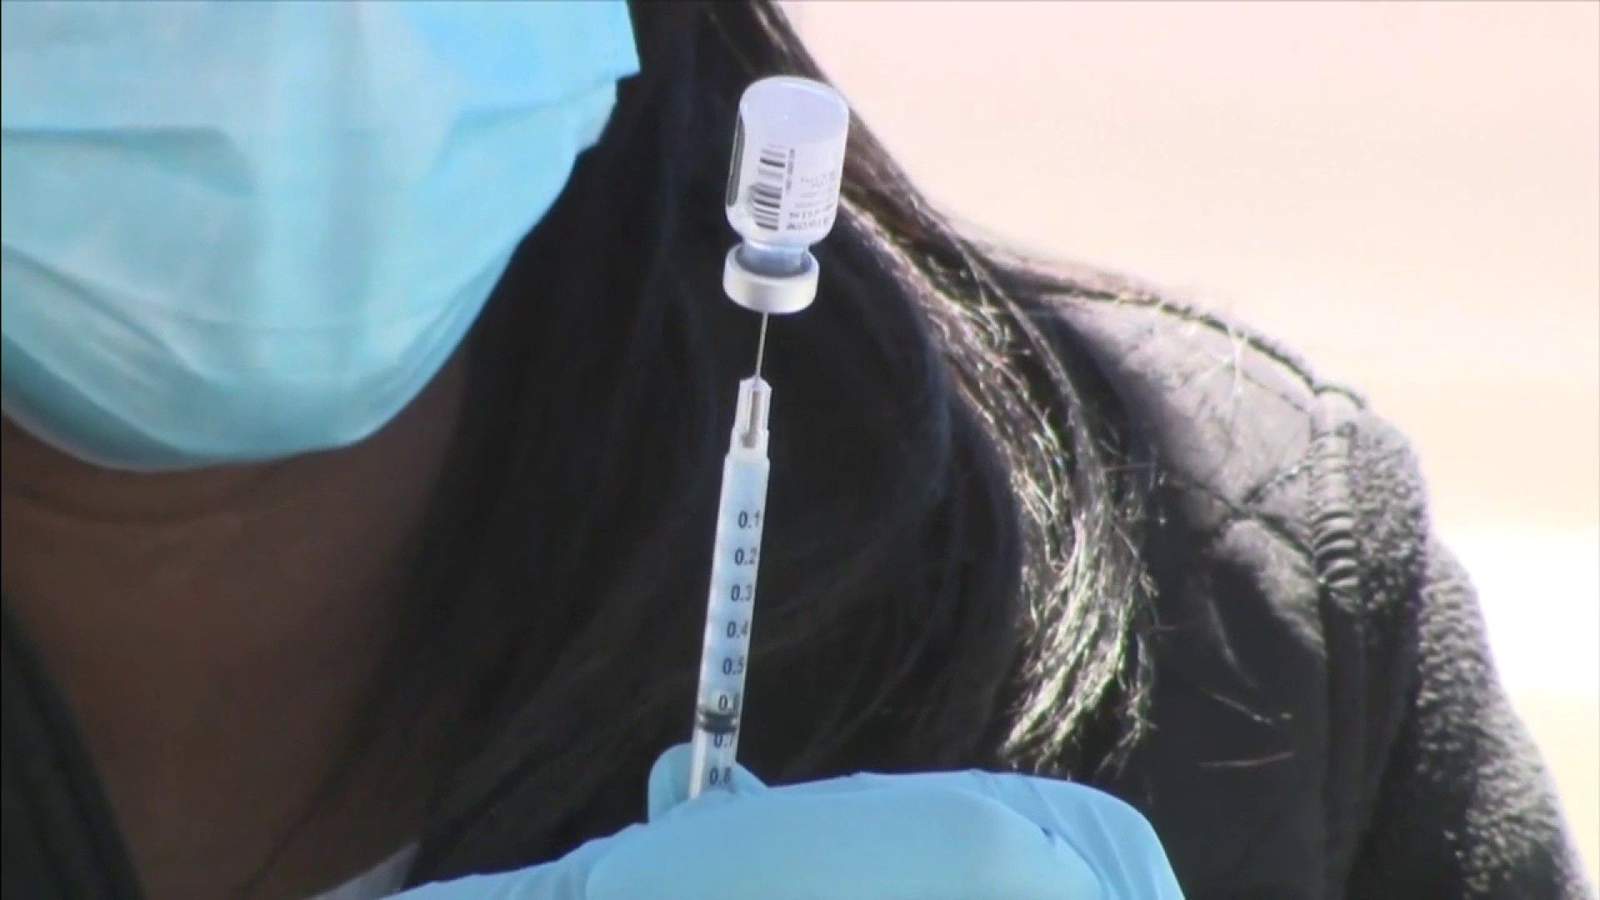 Monroe County Health Department postpones COVID-19 vaccination clinic today due to weather